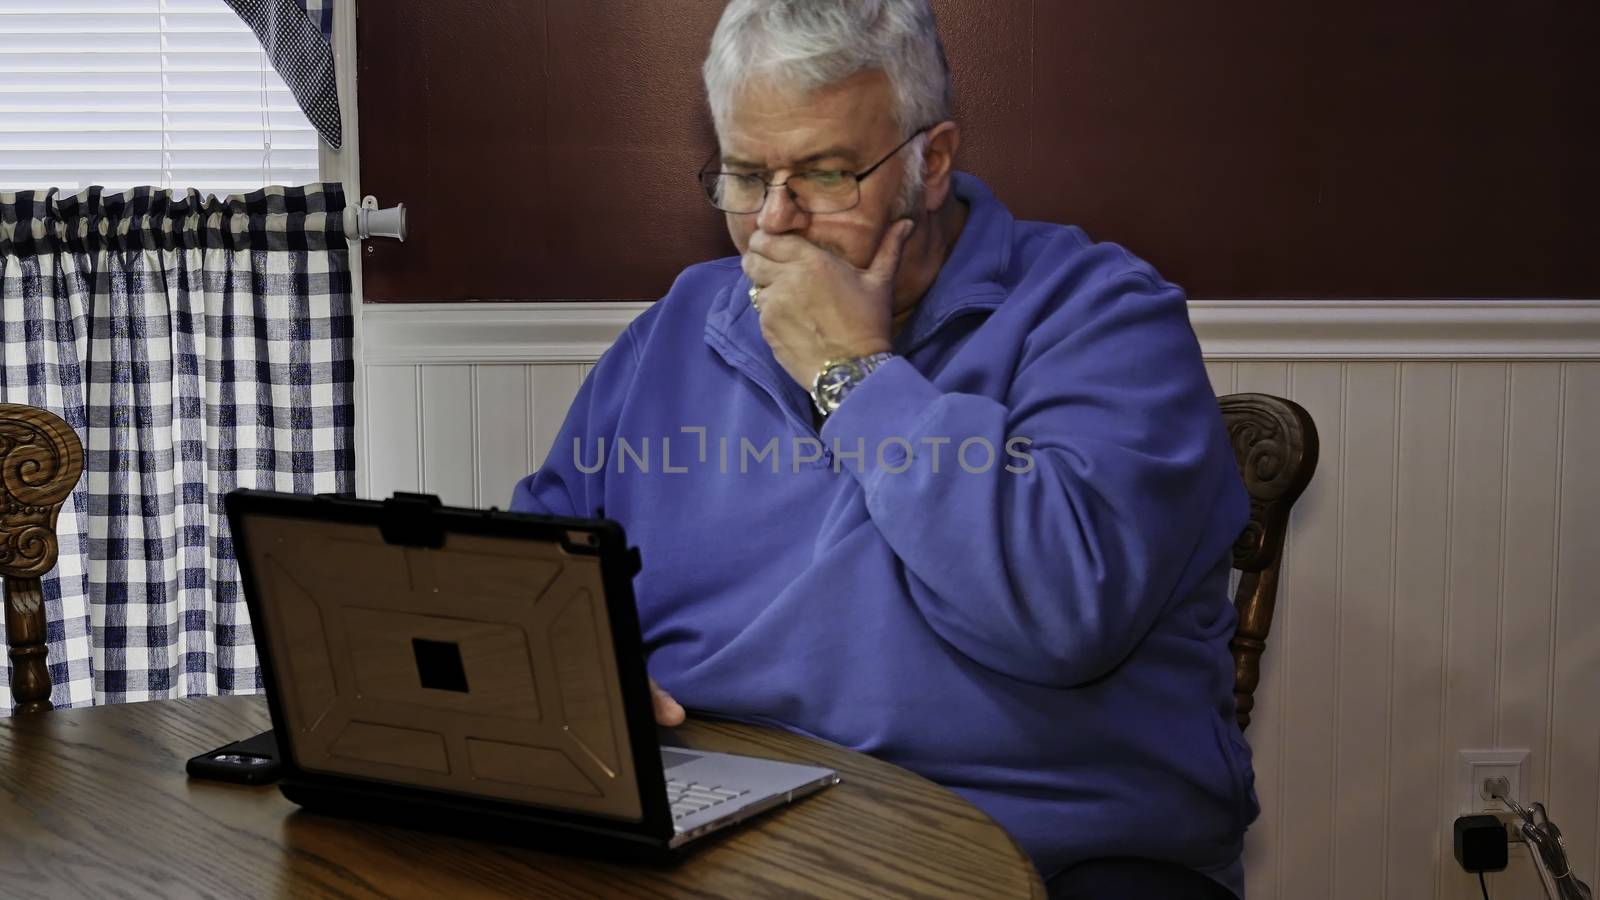 Senior Citizen Upset and Mad at Using a Computer and Technology Senior Citizen Upset and Mad at Using a Computer and Technology